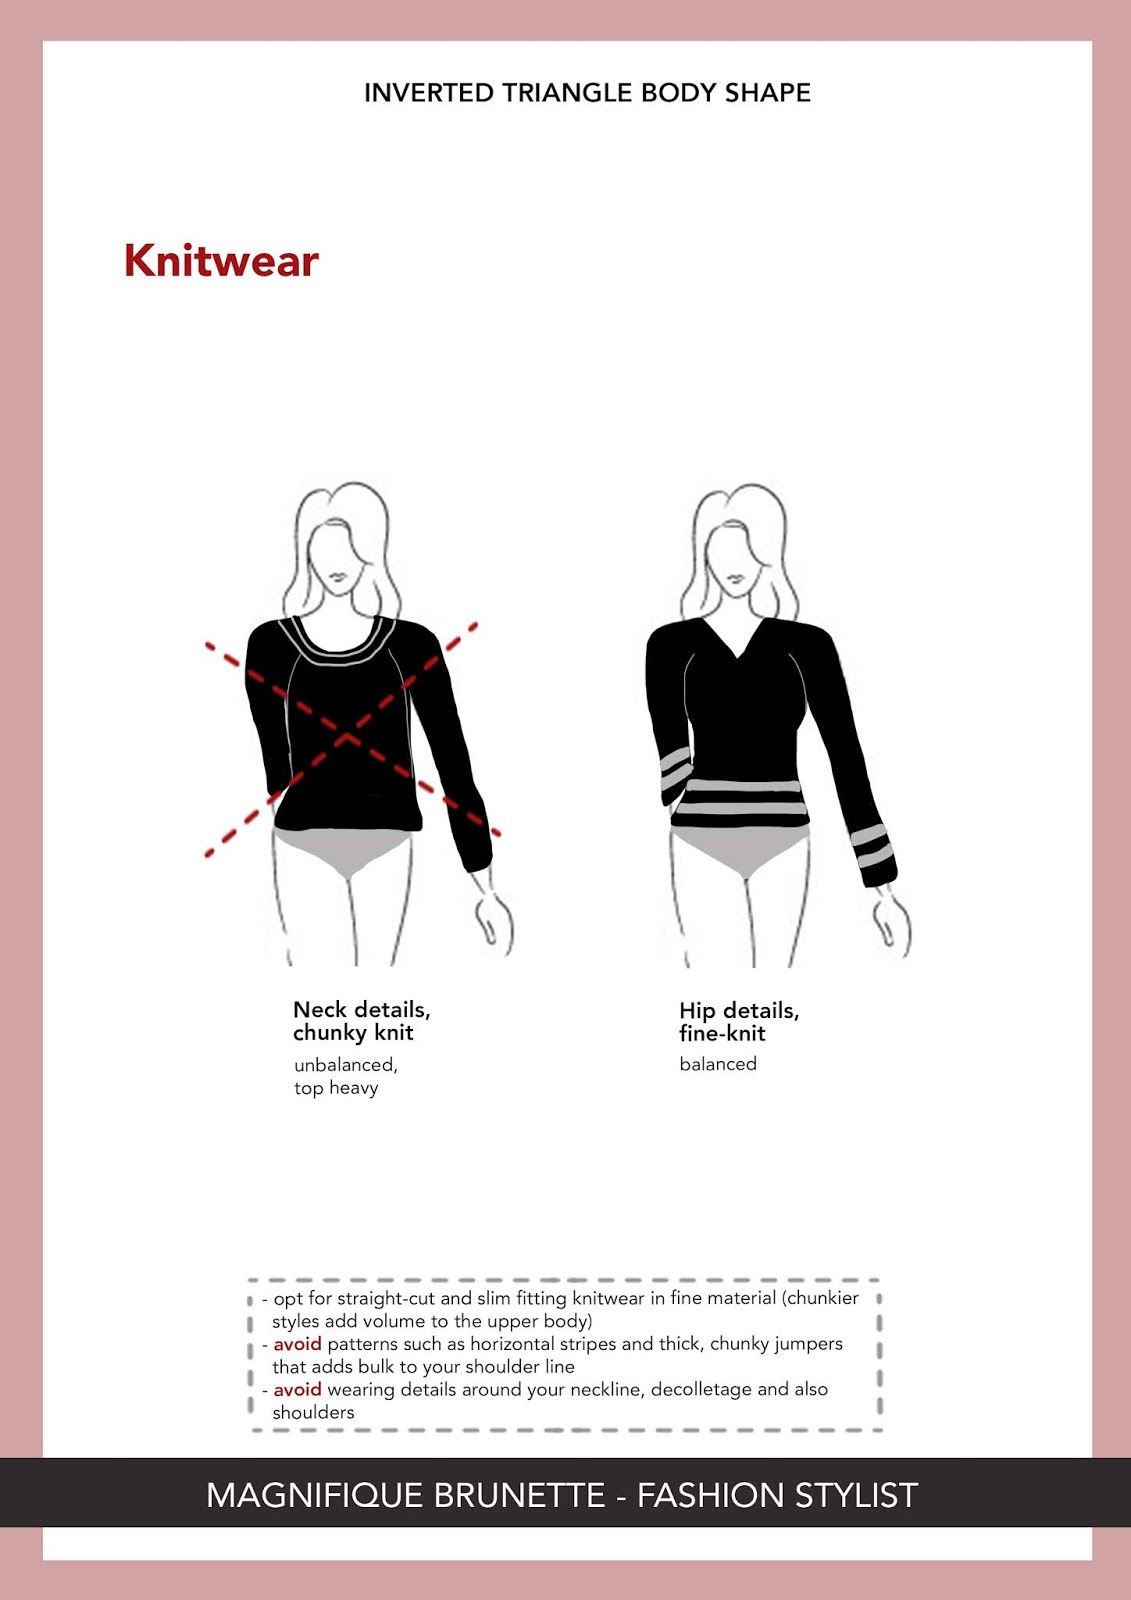 Body Shape Ultimate Guide - Part 3 = INVERTED TRIANGLE SHAPE